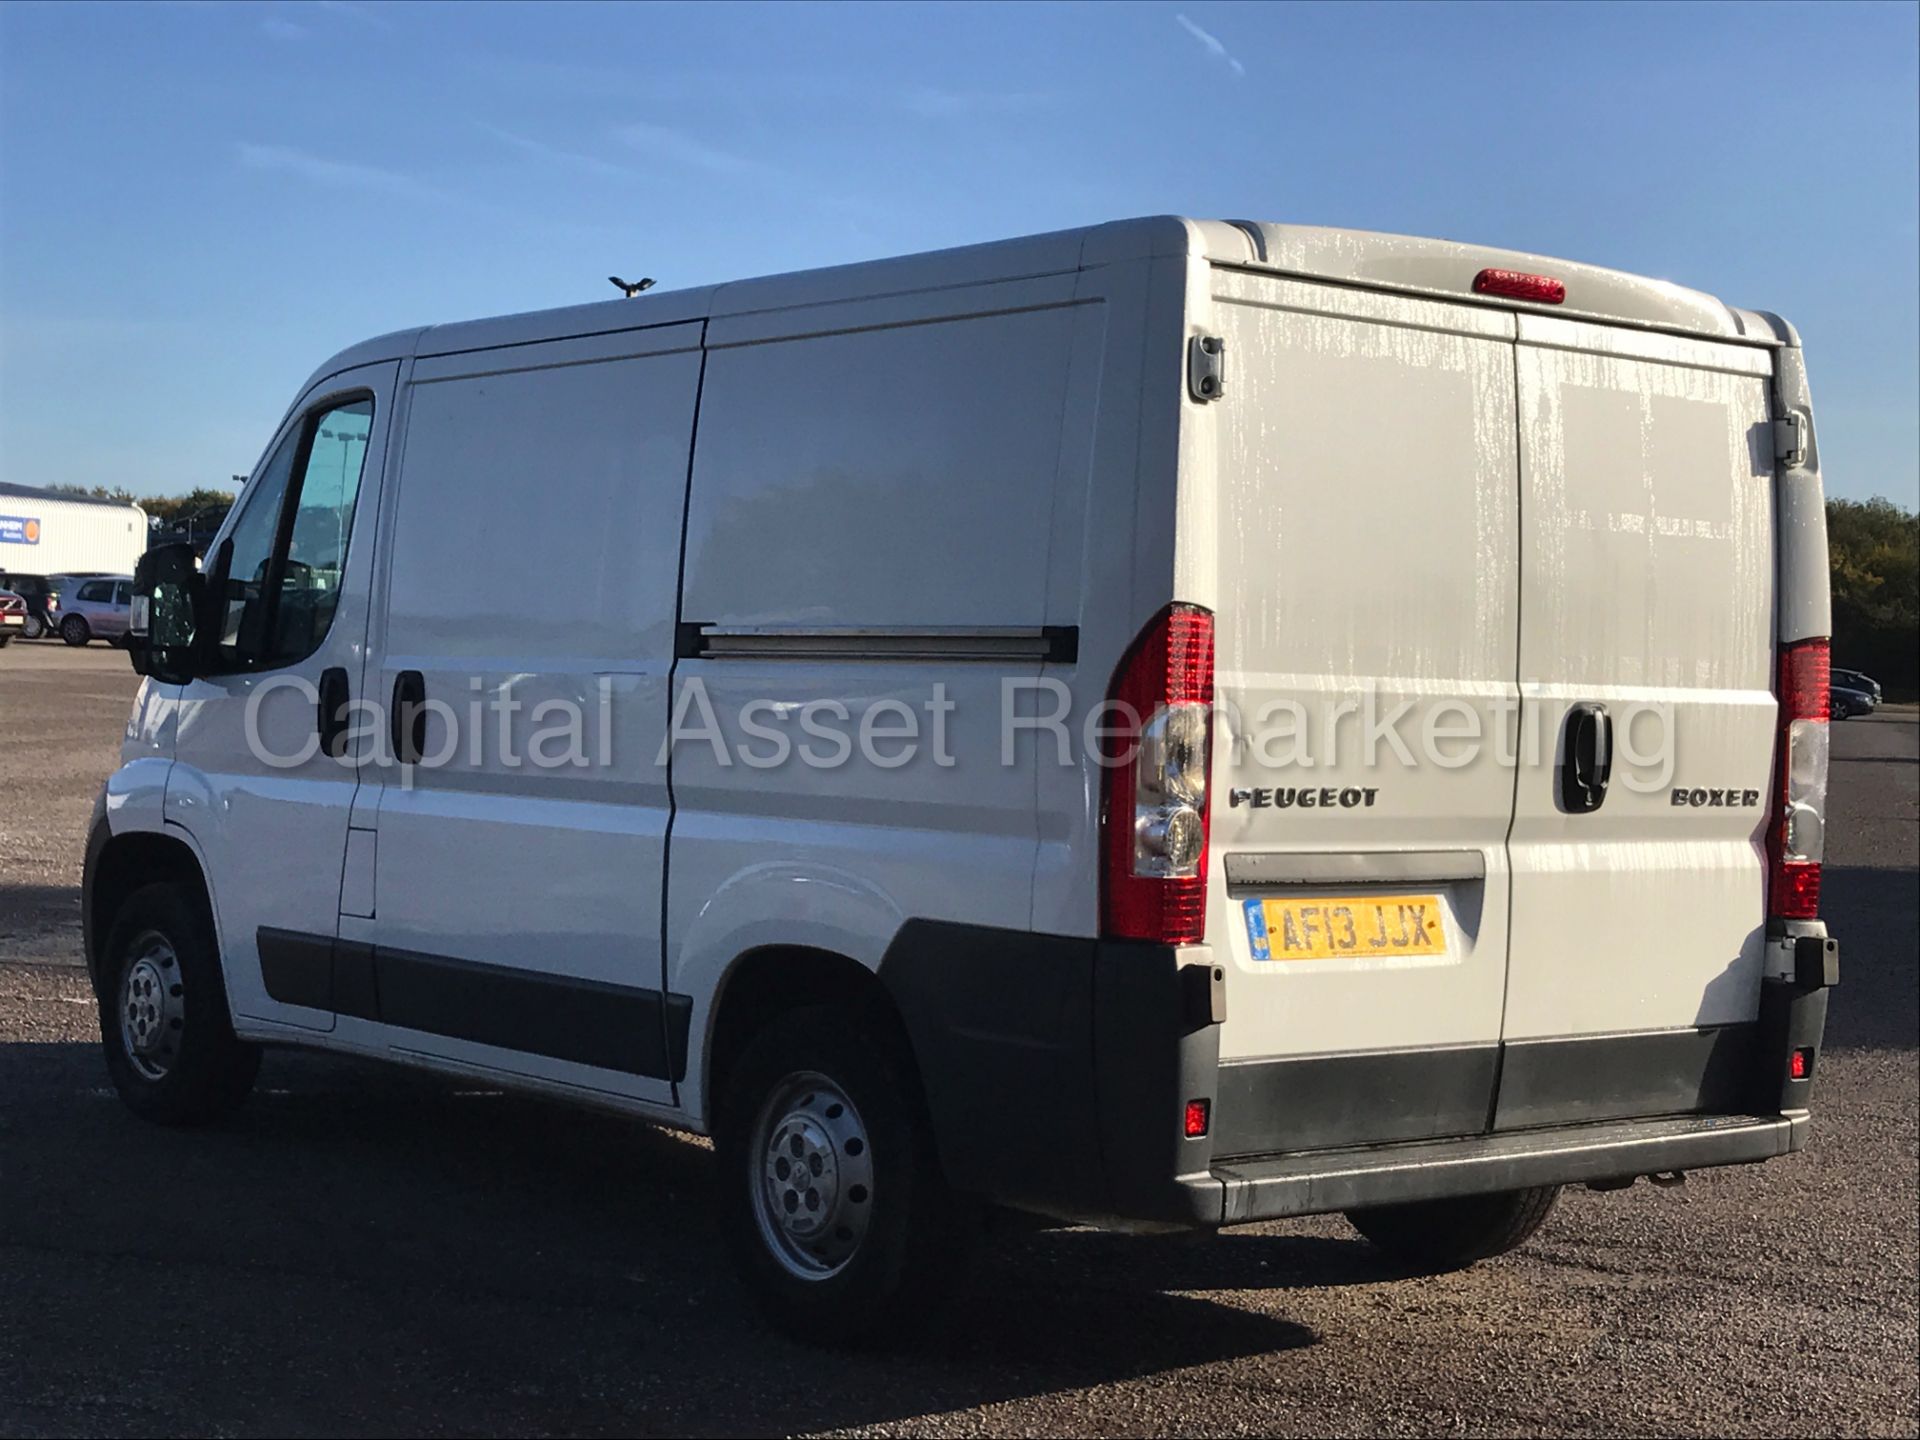 PEUGEOT BOXER 330 L1H1 (2013 - 13 REG) 'SWB - 2.2 HDI - 6 SPEED' (1 OWNER FROM NEW) **LOW MILES** - Image 6 of 19